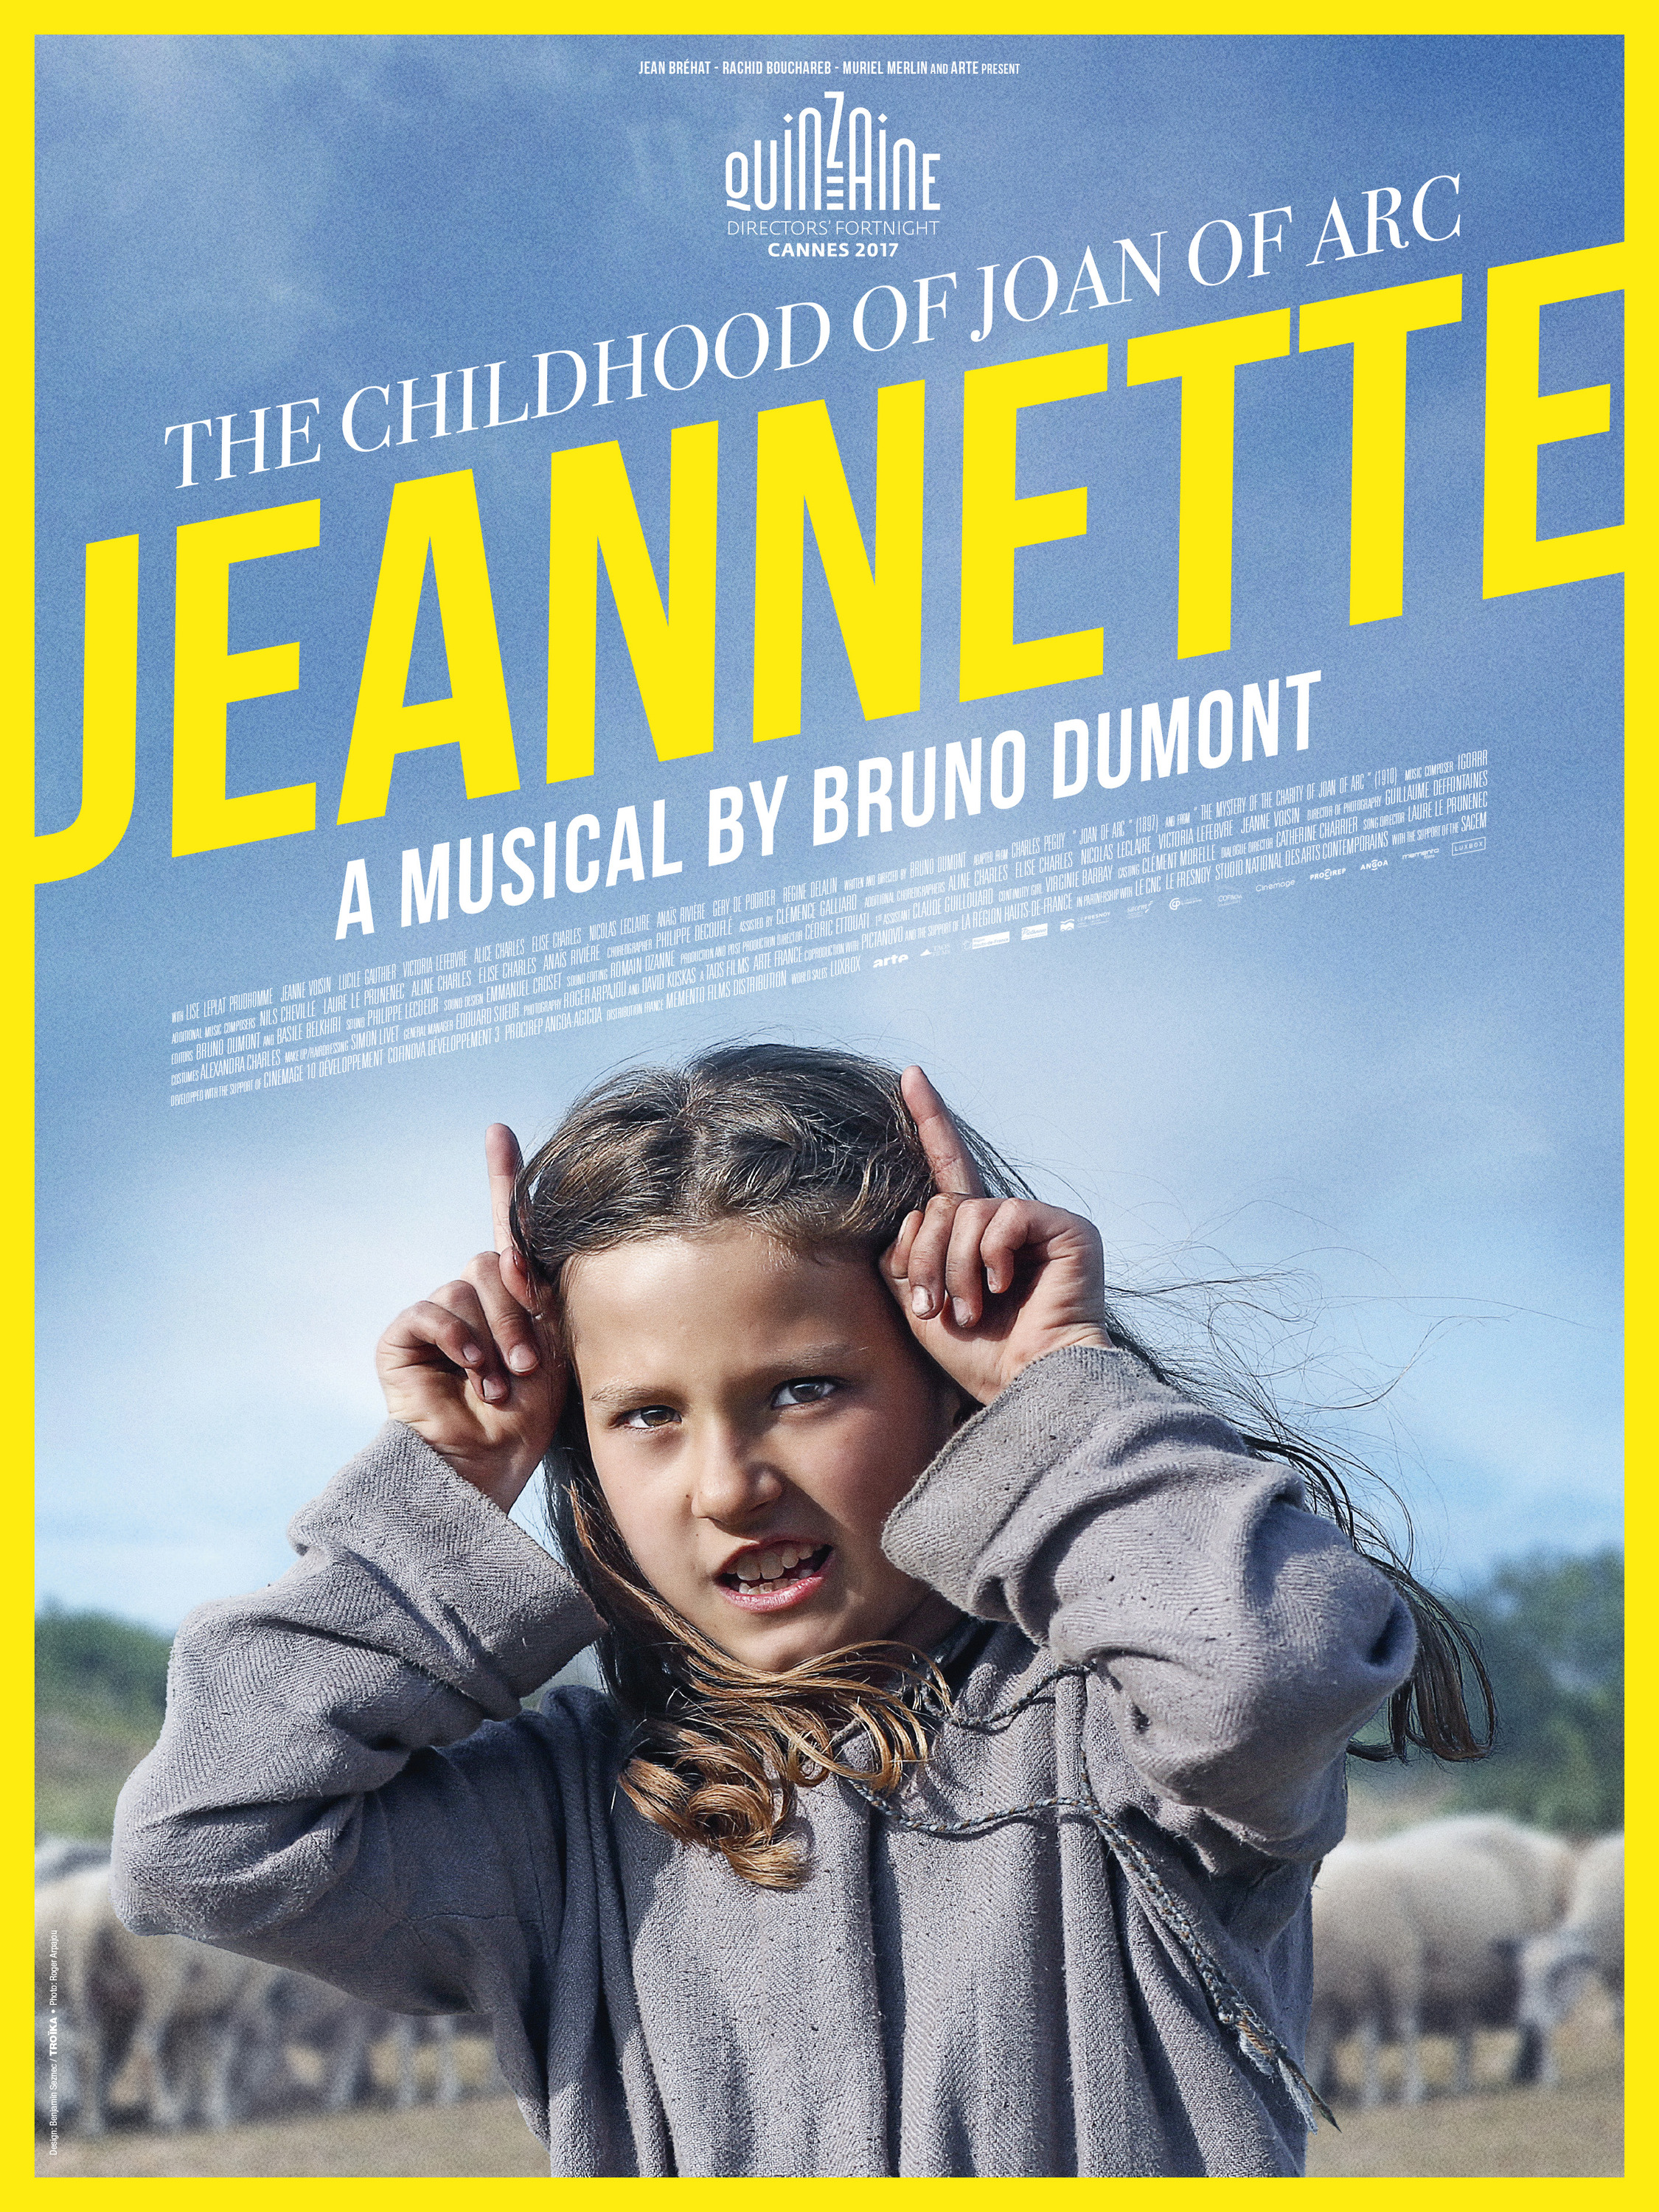 Mega Sized Movie Poster Image for Jeannette: The Childhood of Joan of Arc 